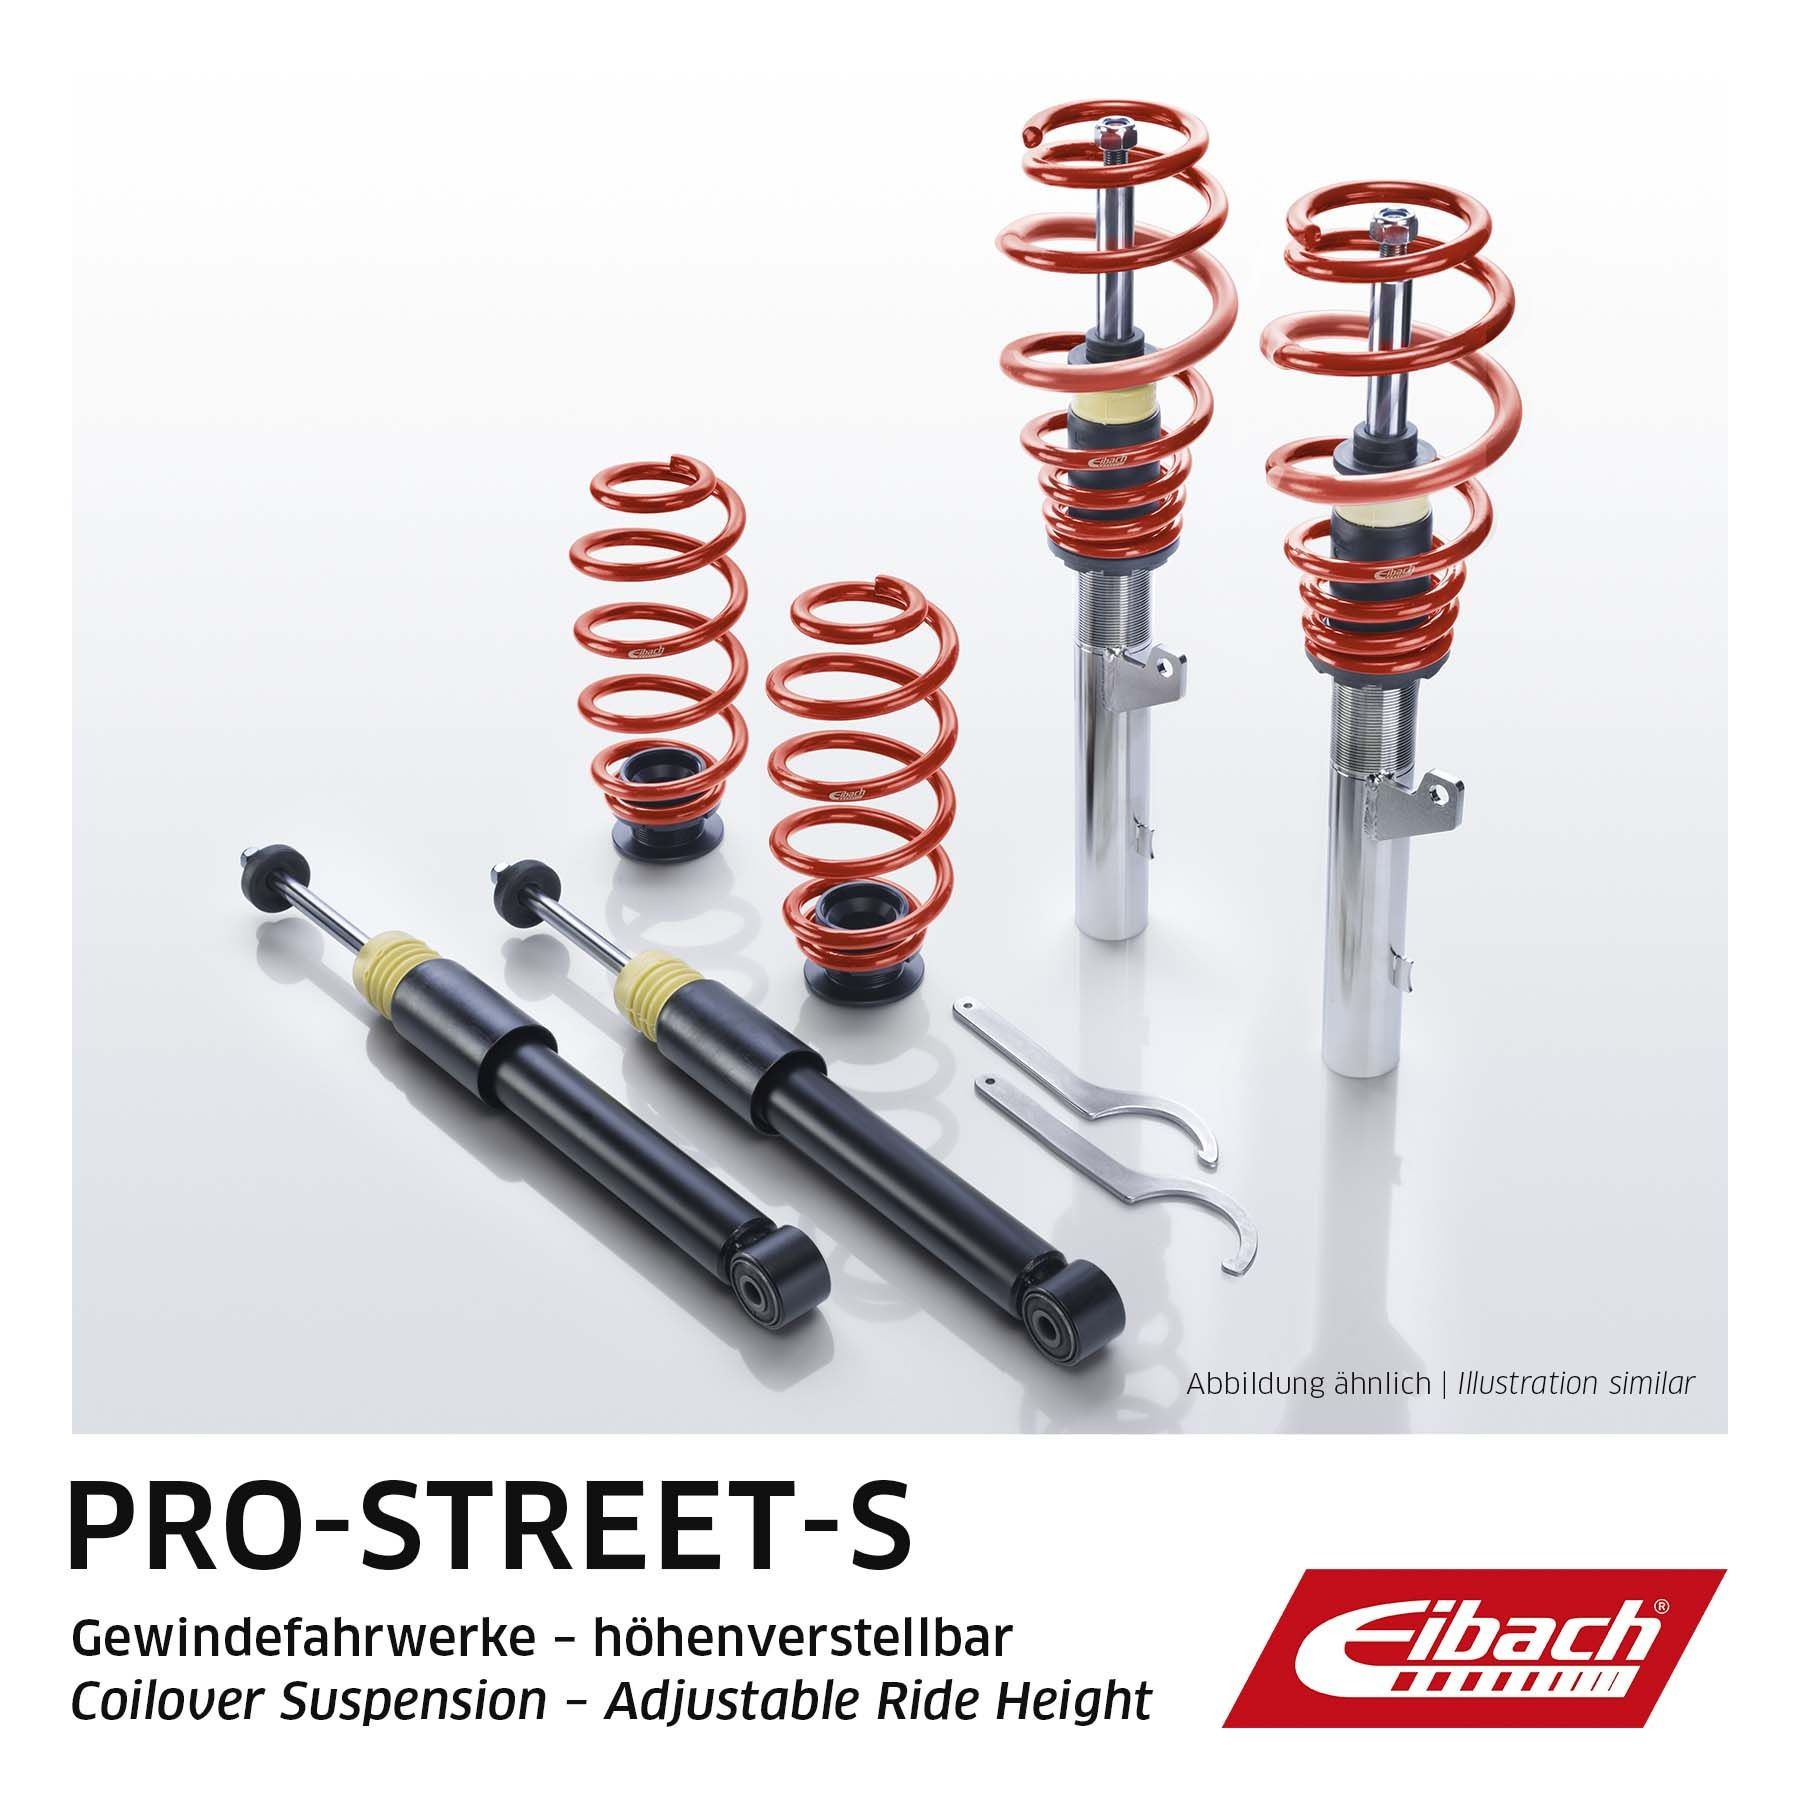 65150110322 EIBACH Pro-Street-S PSS65-15-011-03-22 Suspension kit, coil springs / shock absorbers